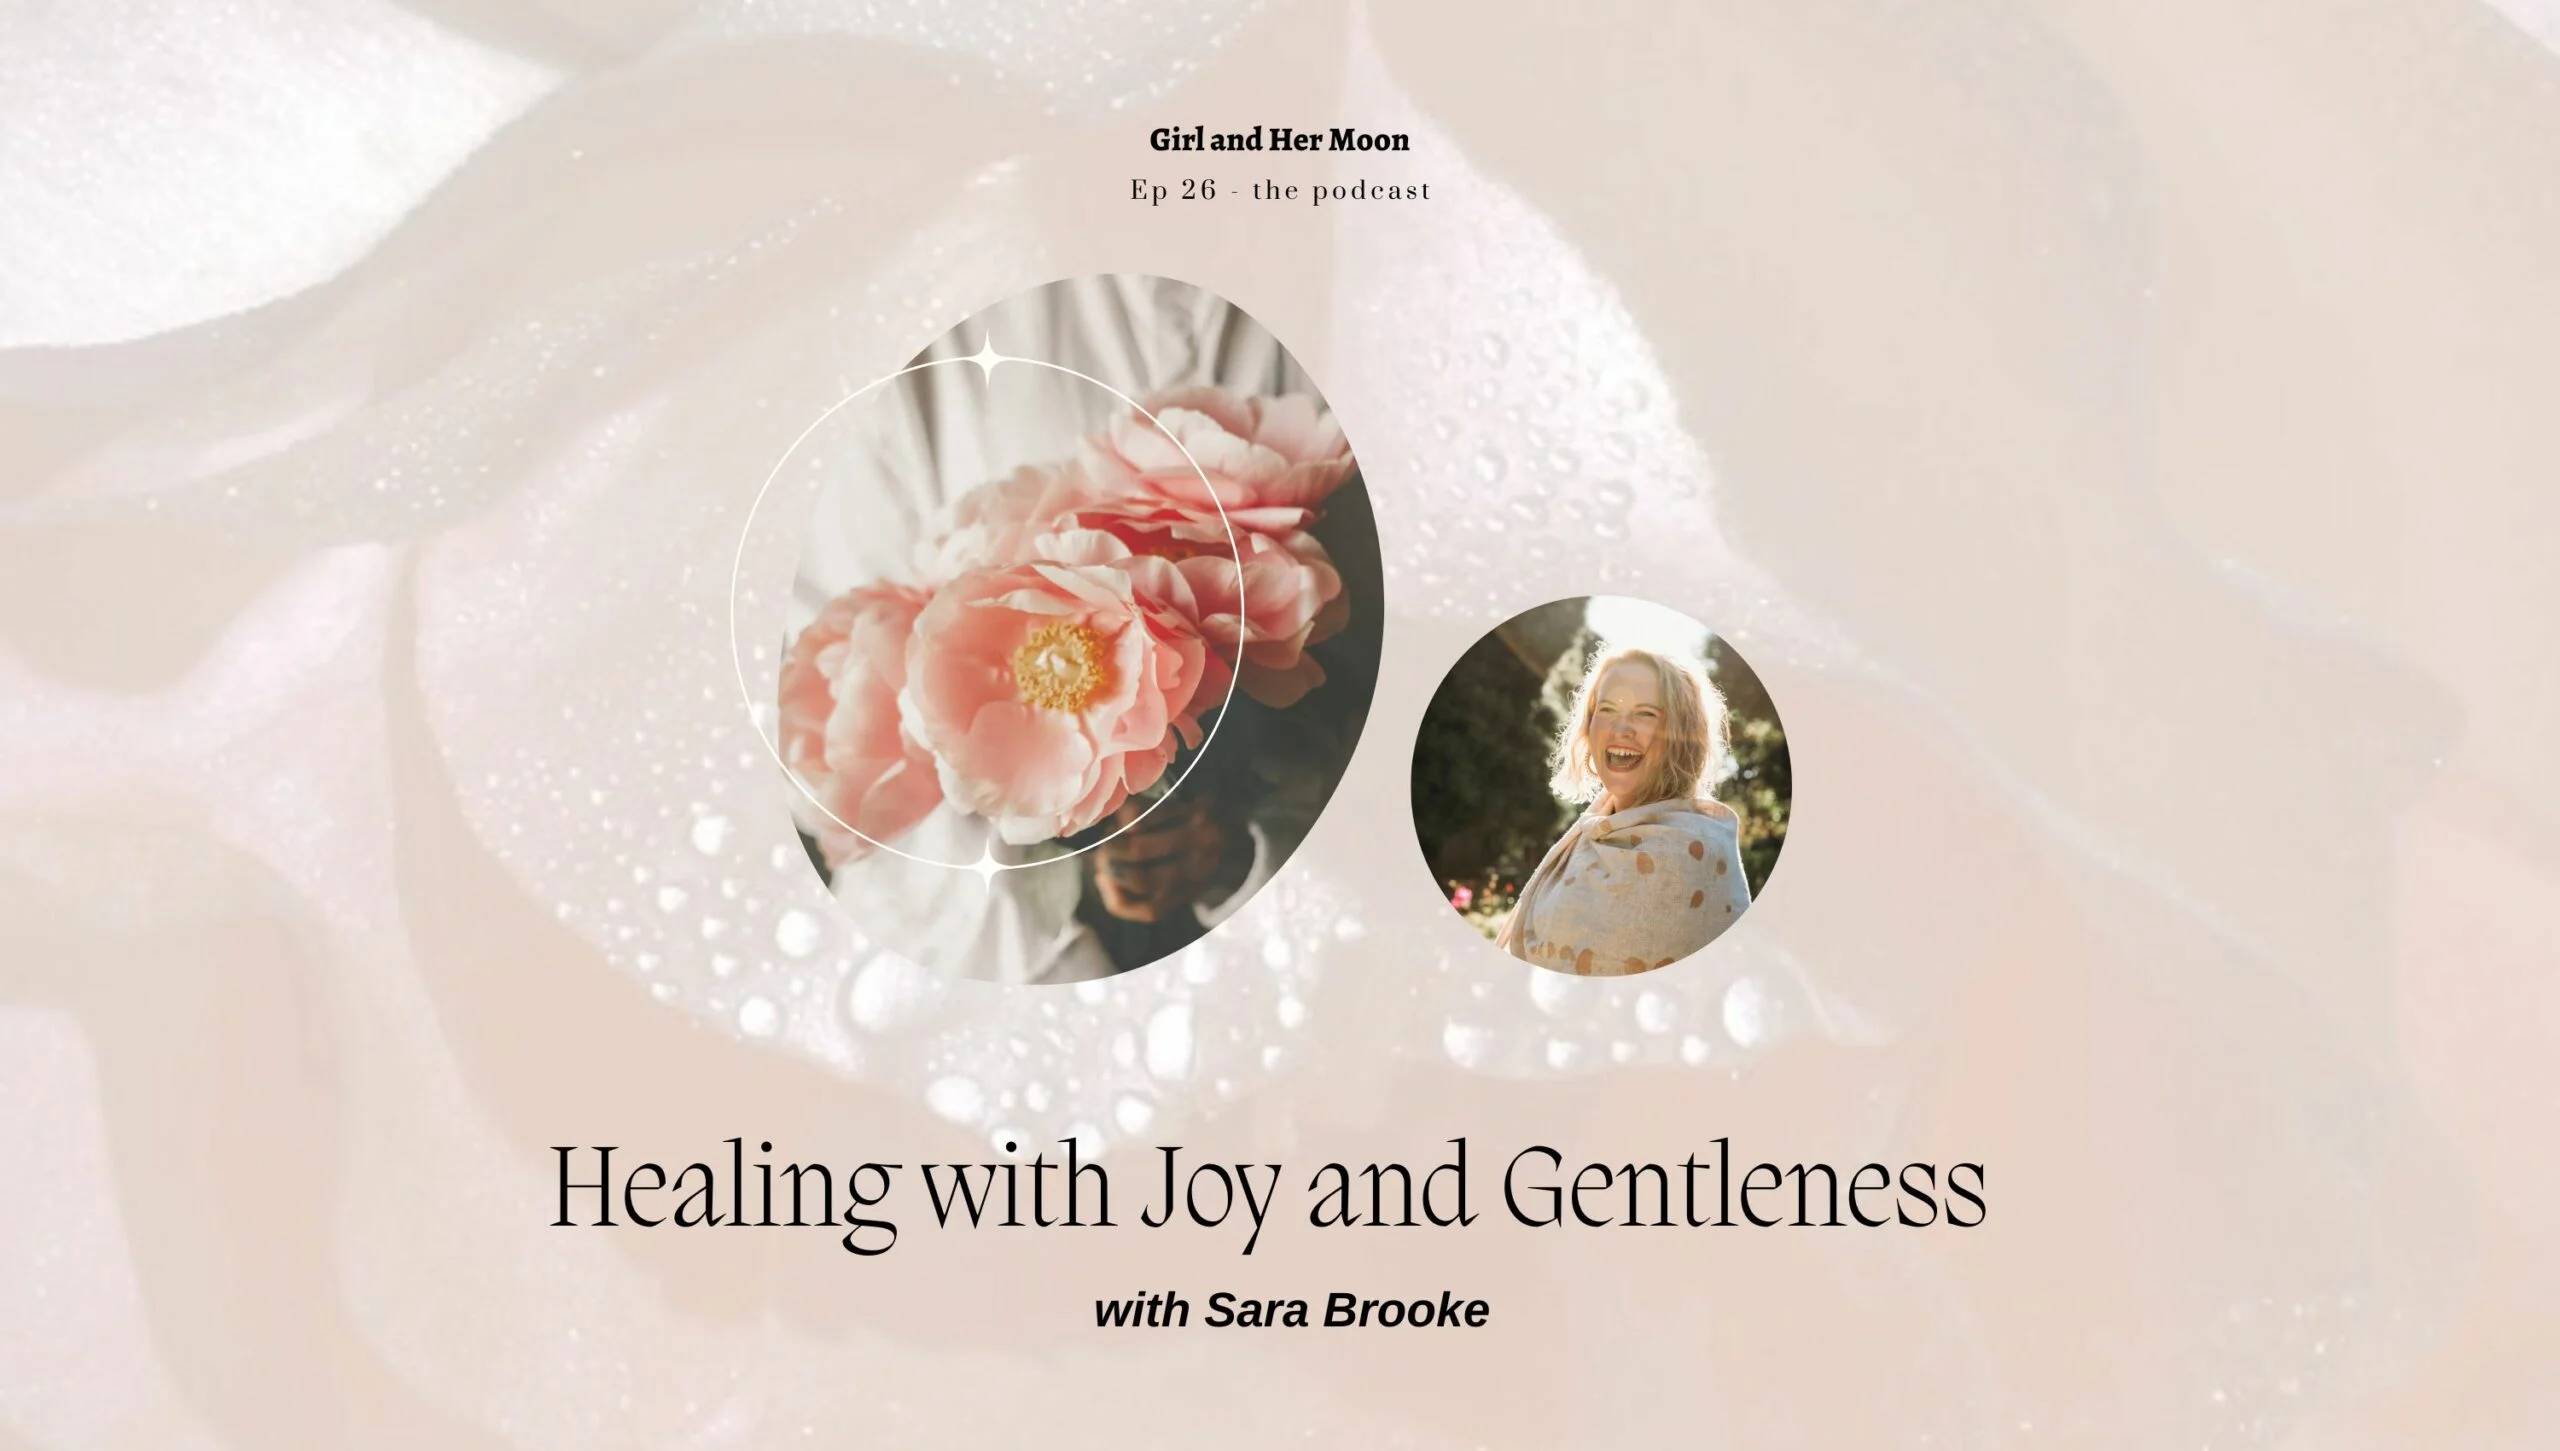 Healing with Joy and Gentleness with Sara Brooke